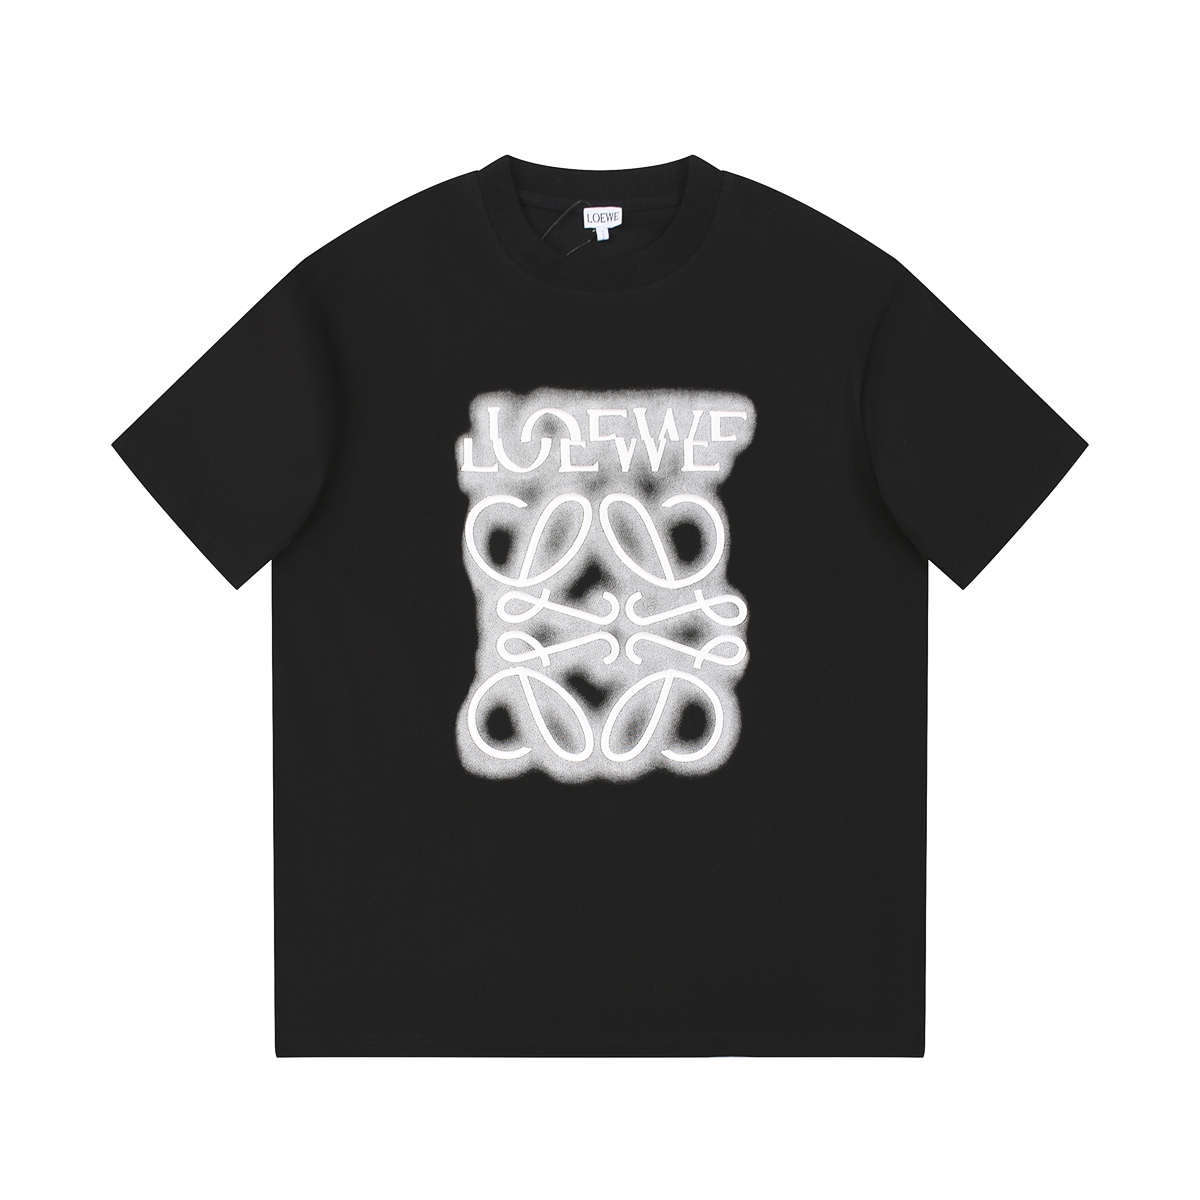 Loewe Clothing T-Shirt Customize The Best Replica
 Black Pink White Embroidery Unisex Short Sleeve